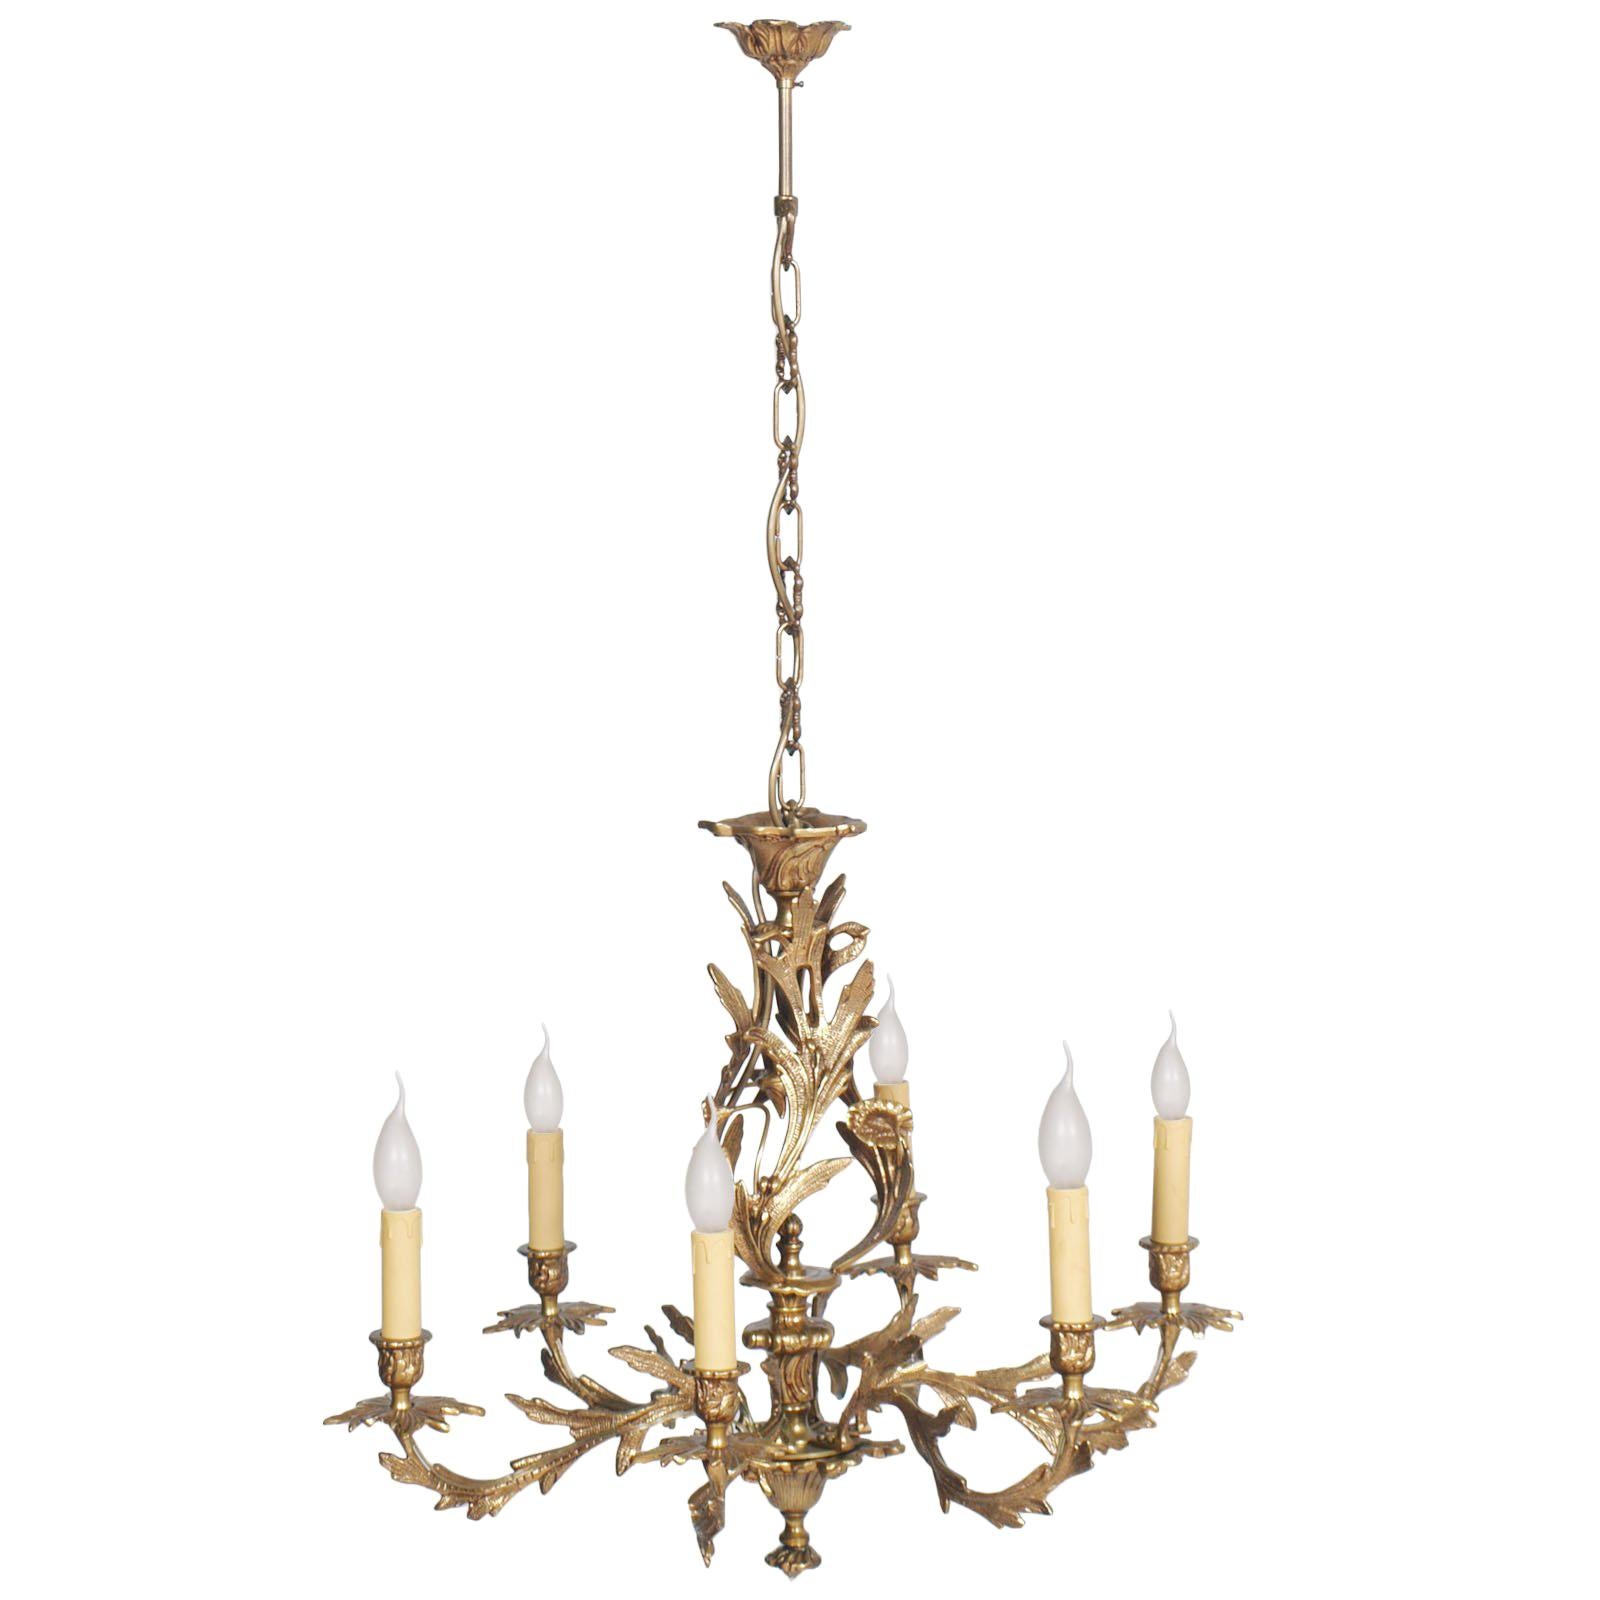 Antique Very Heavy Chandelier from a Old Candlestick, Gilded Bronze, Six Lights For Sale